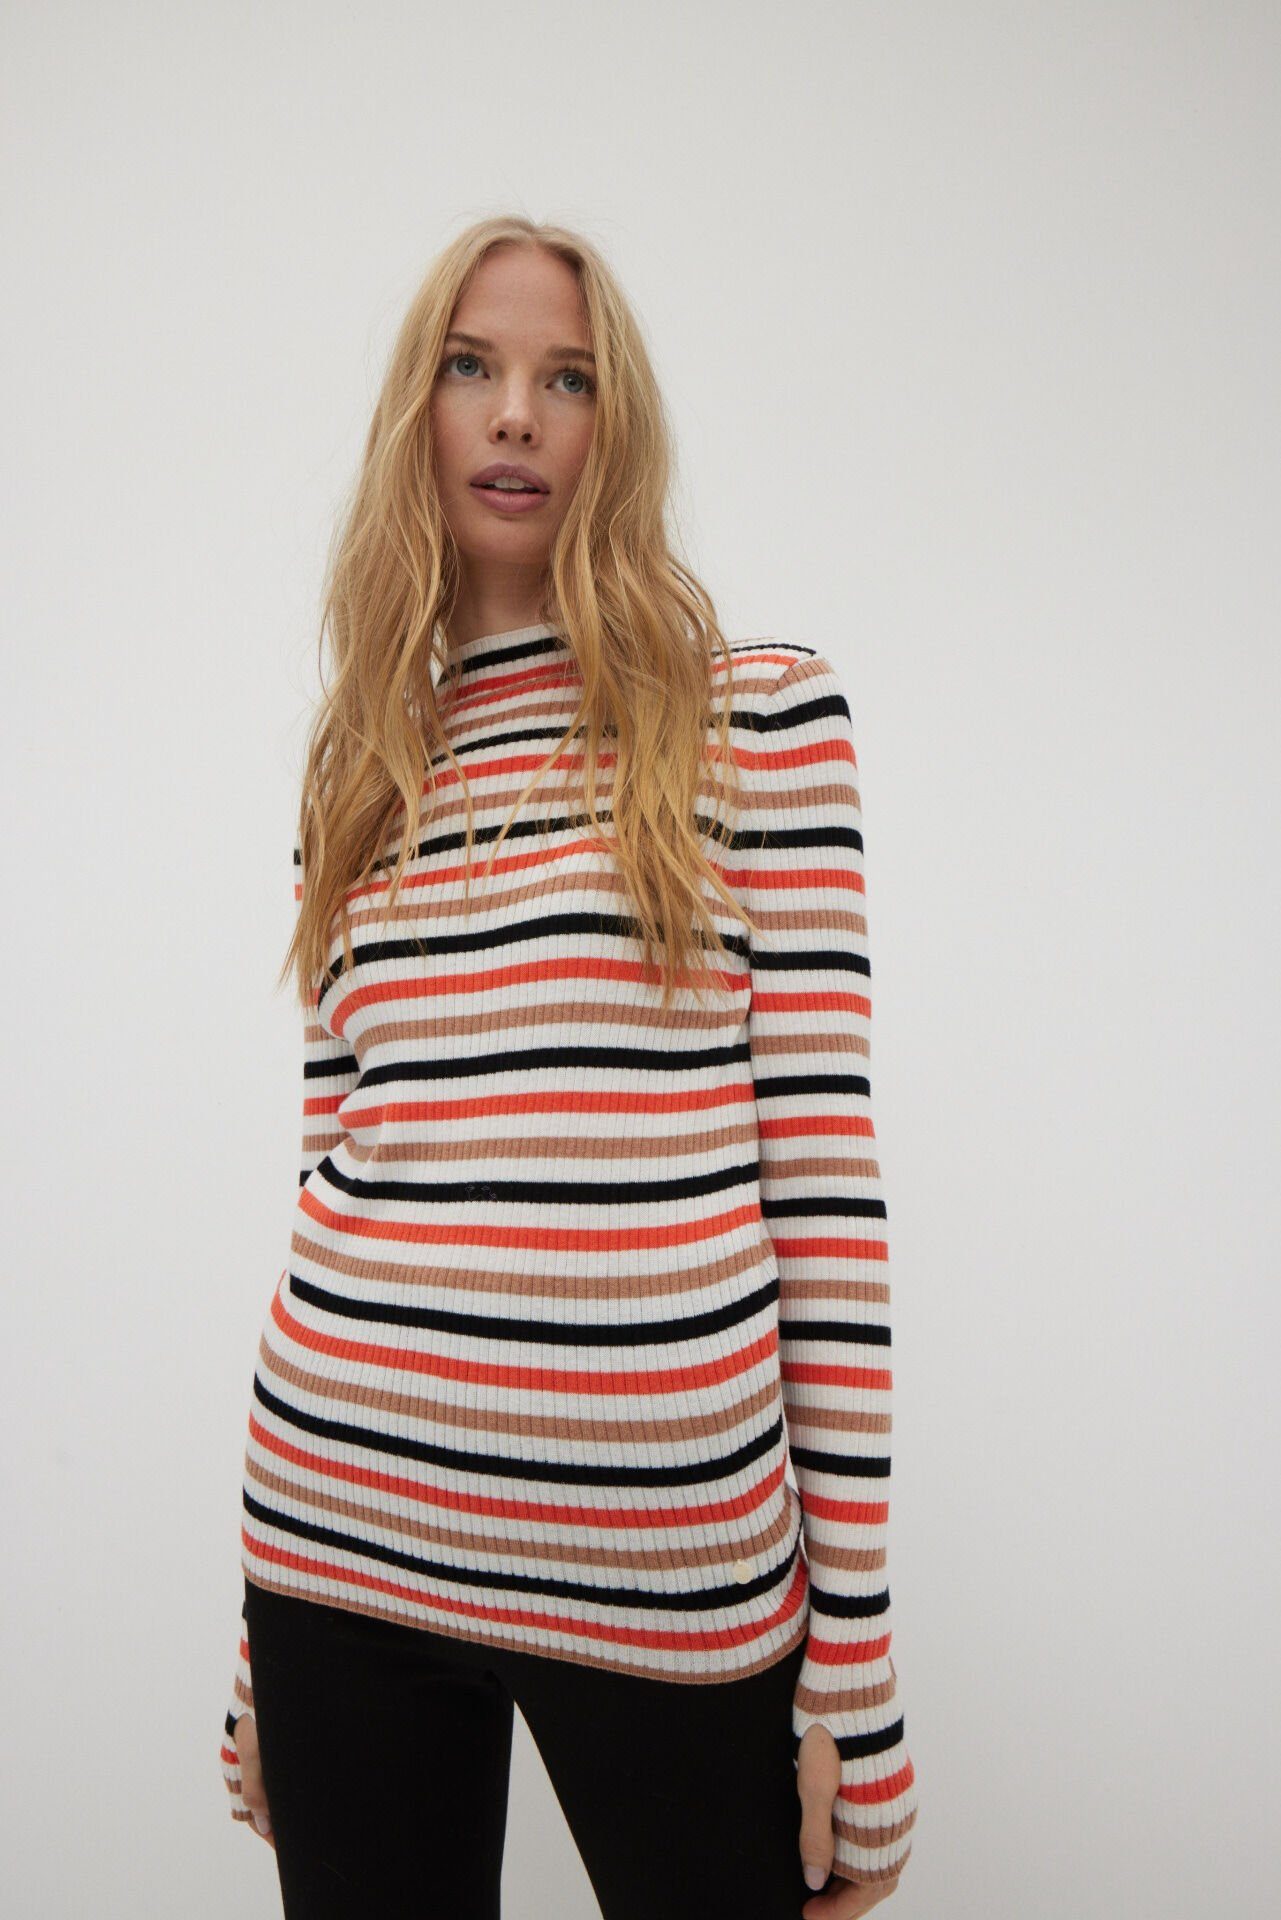 THE Rundhalspullover FLAME RED Turtleneck, PEOPLE FASHION Basic striped